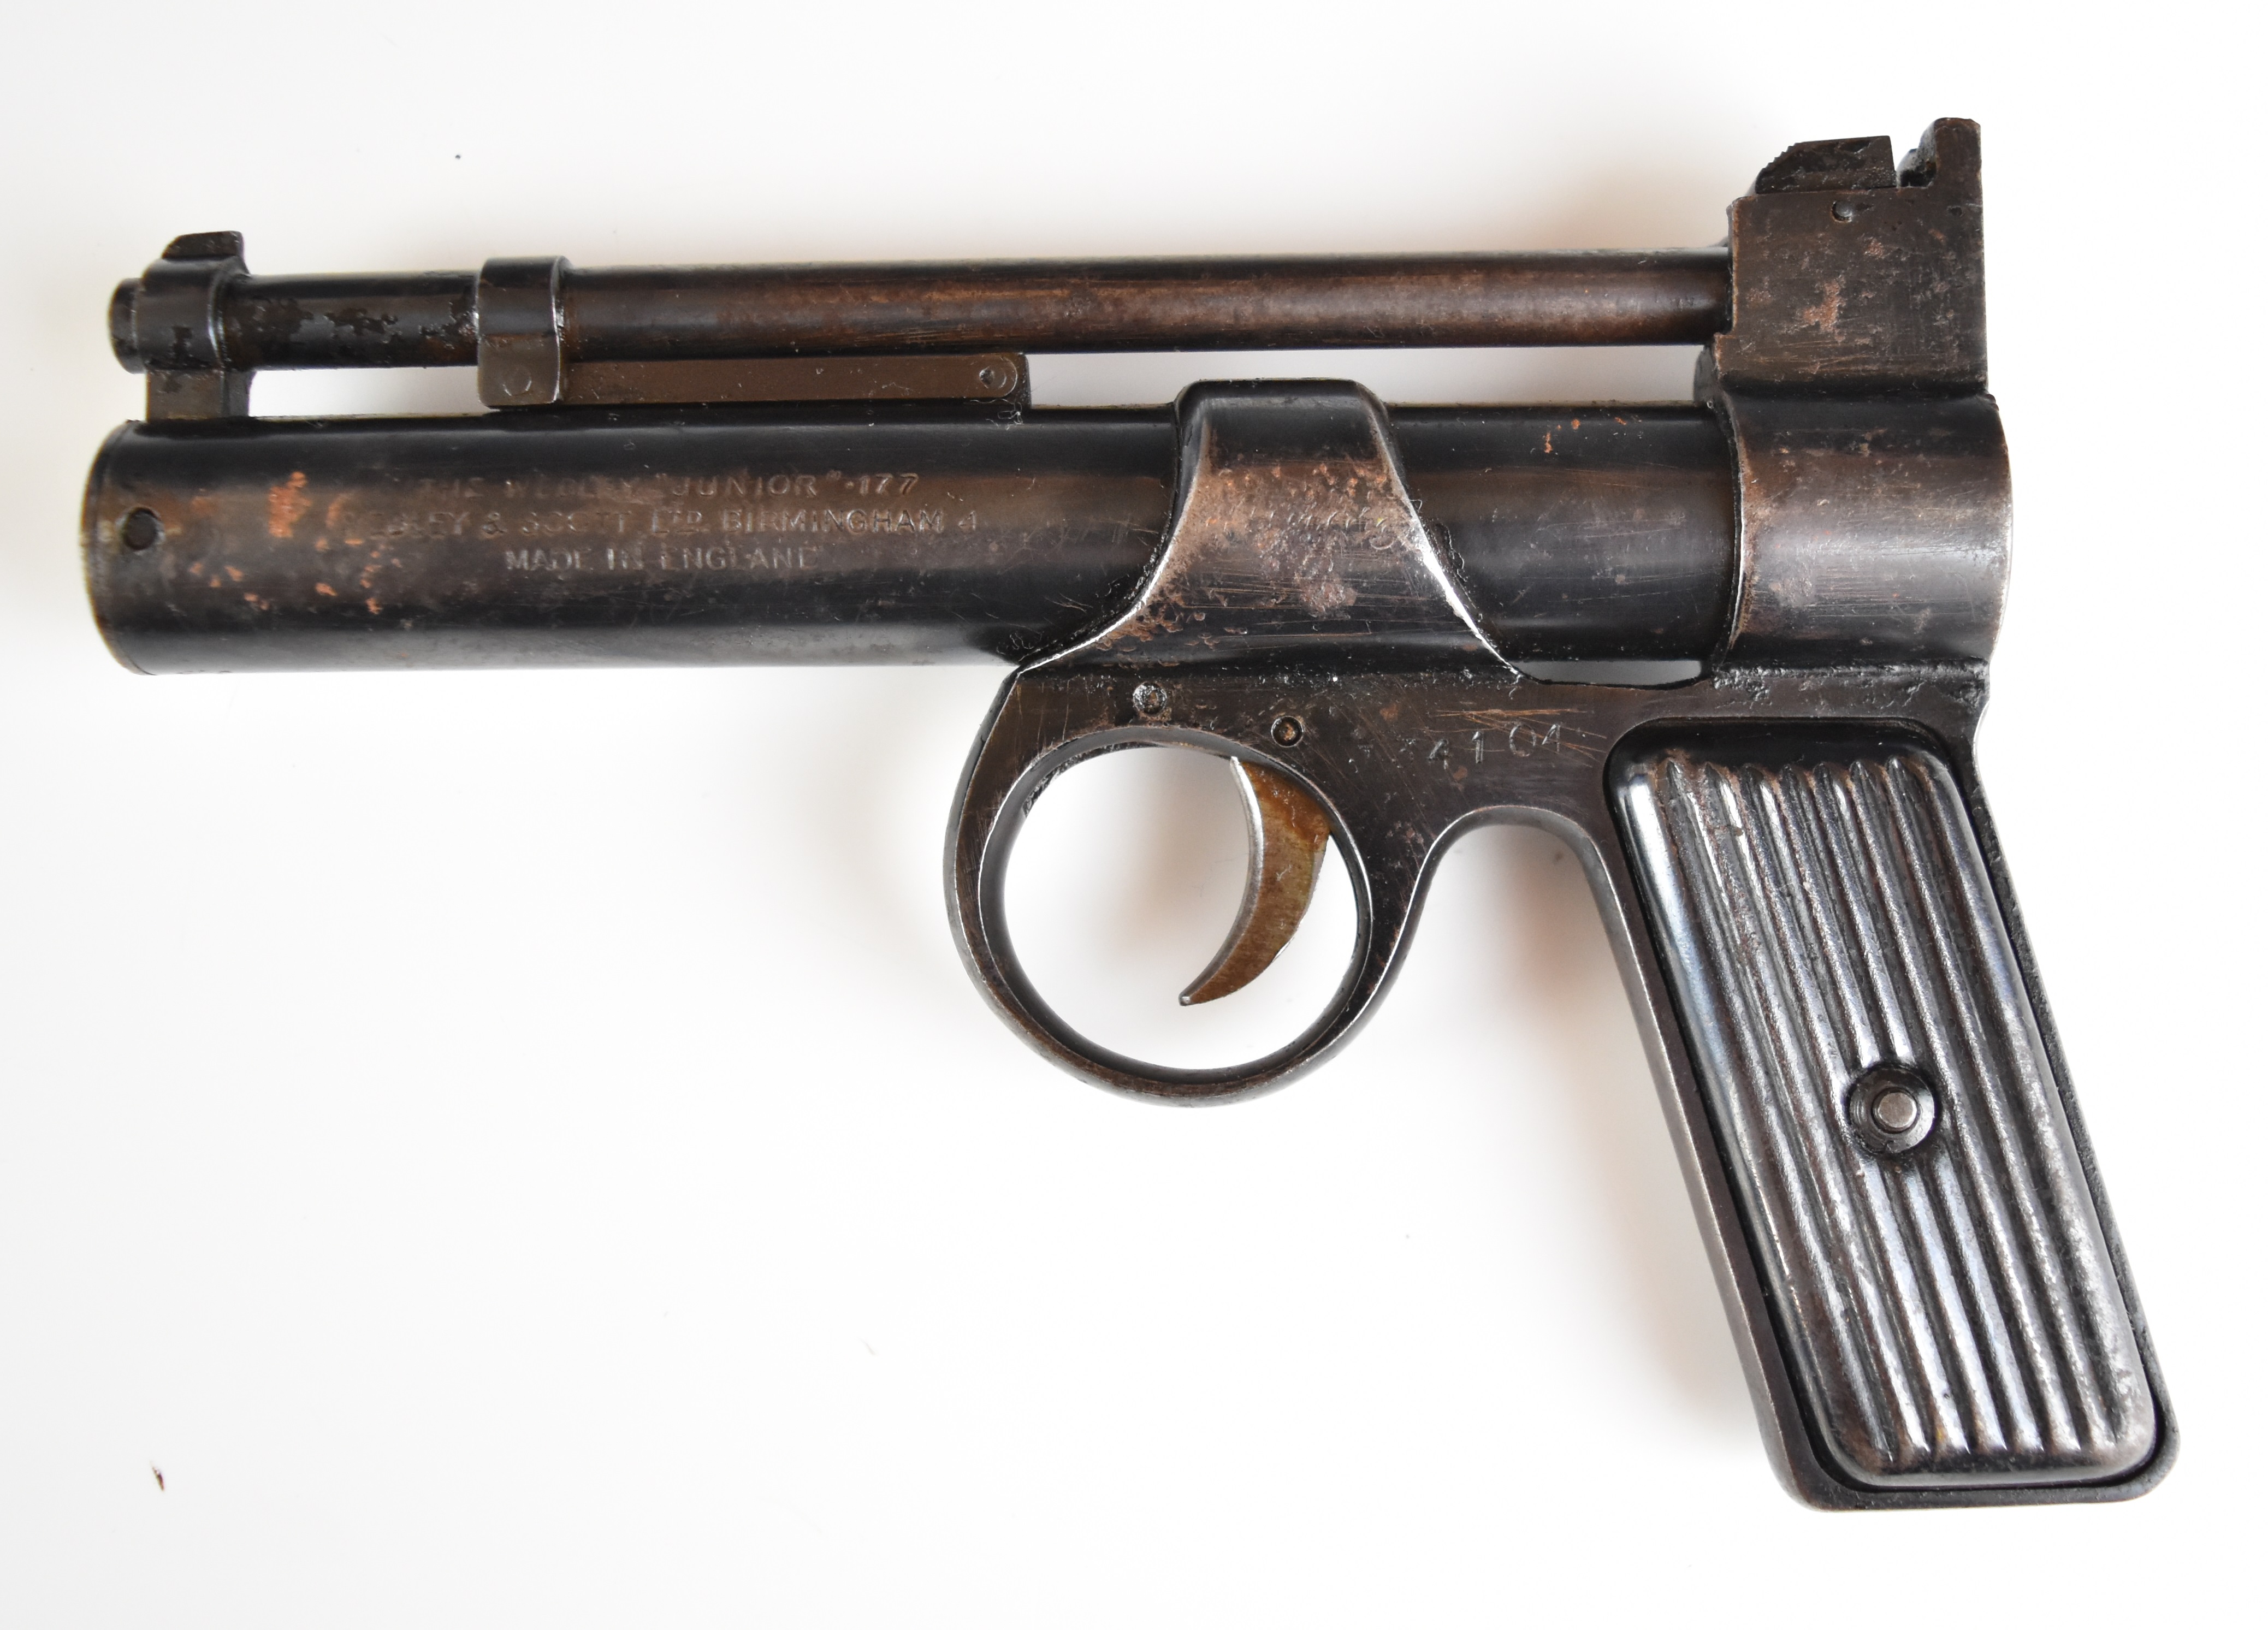 Webley Junior .177 air pistol with reeded metal grips and adjustable sights, serial number J34104. - Image 2 of 10